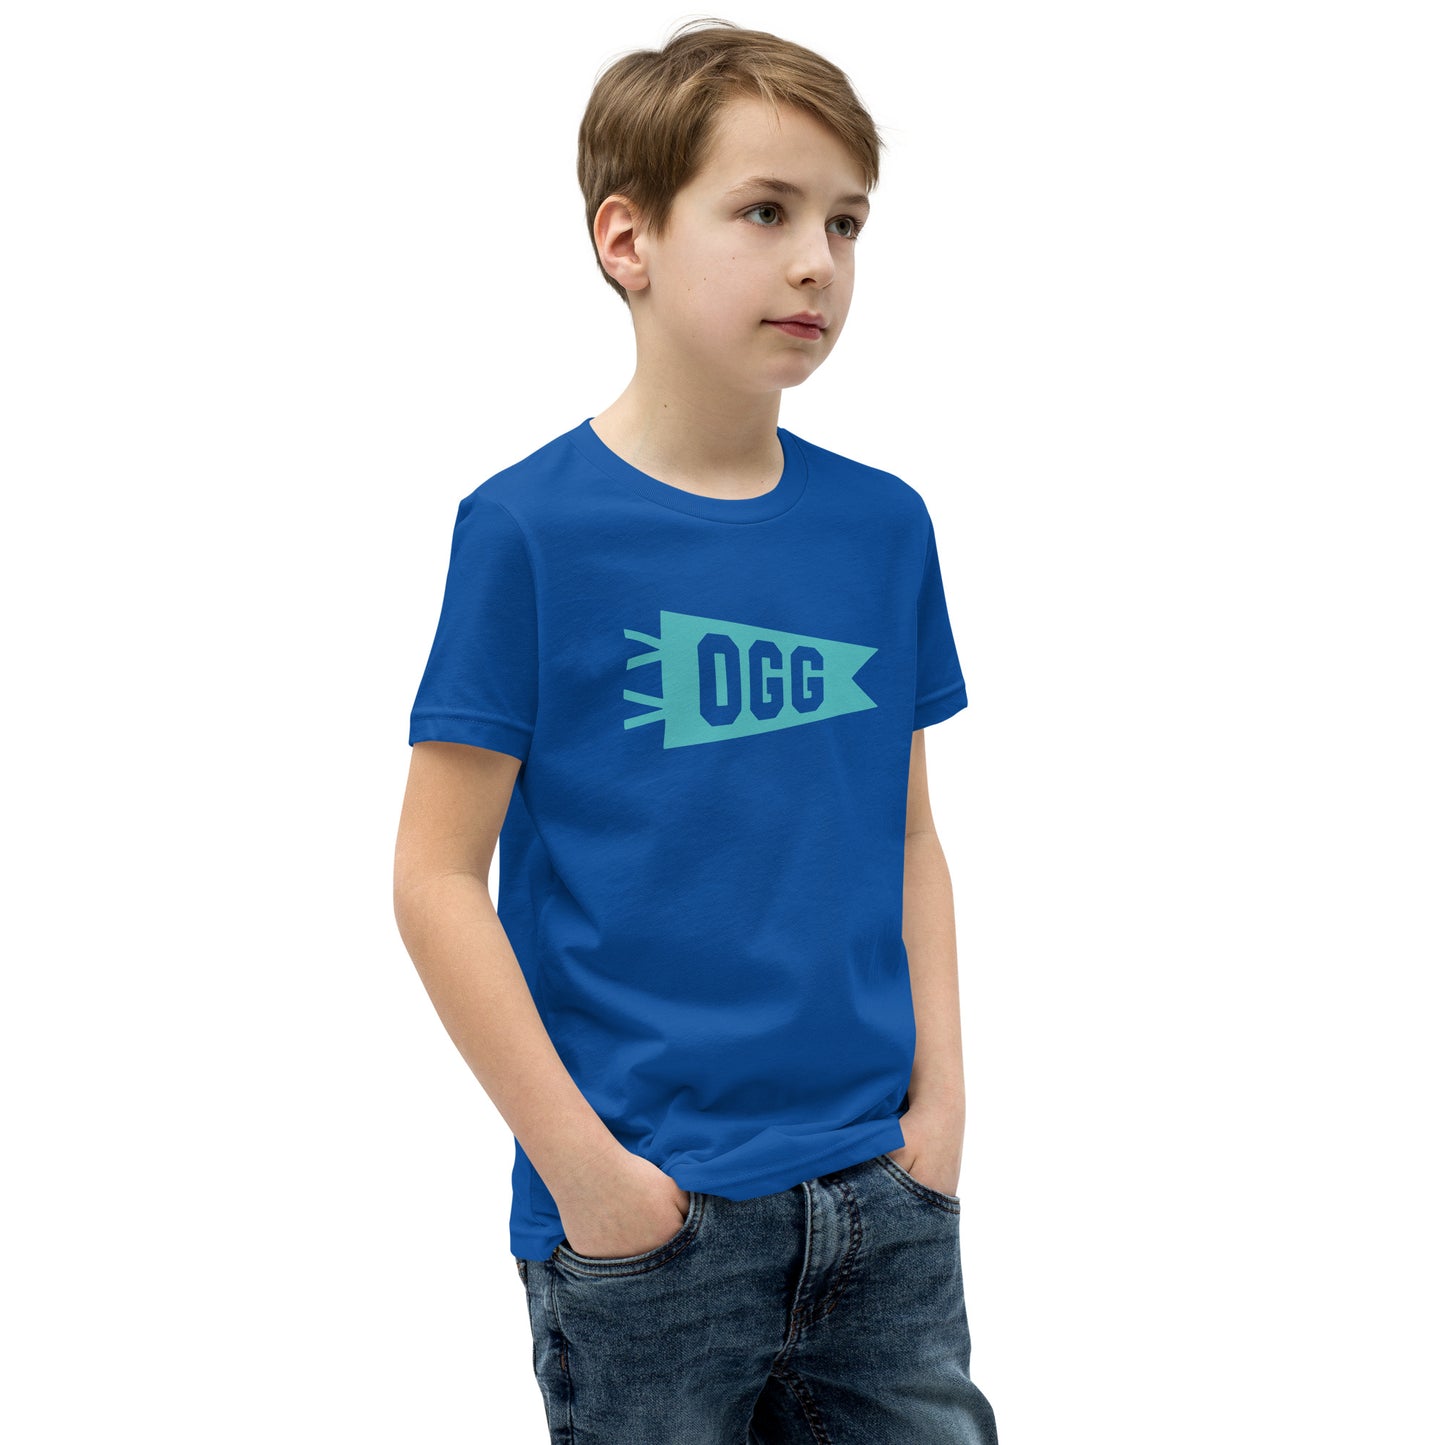 Kid's Airport Code Tee - Viking Blue Graphic • OGG Maui • YHM Designs - Image 07